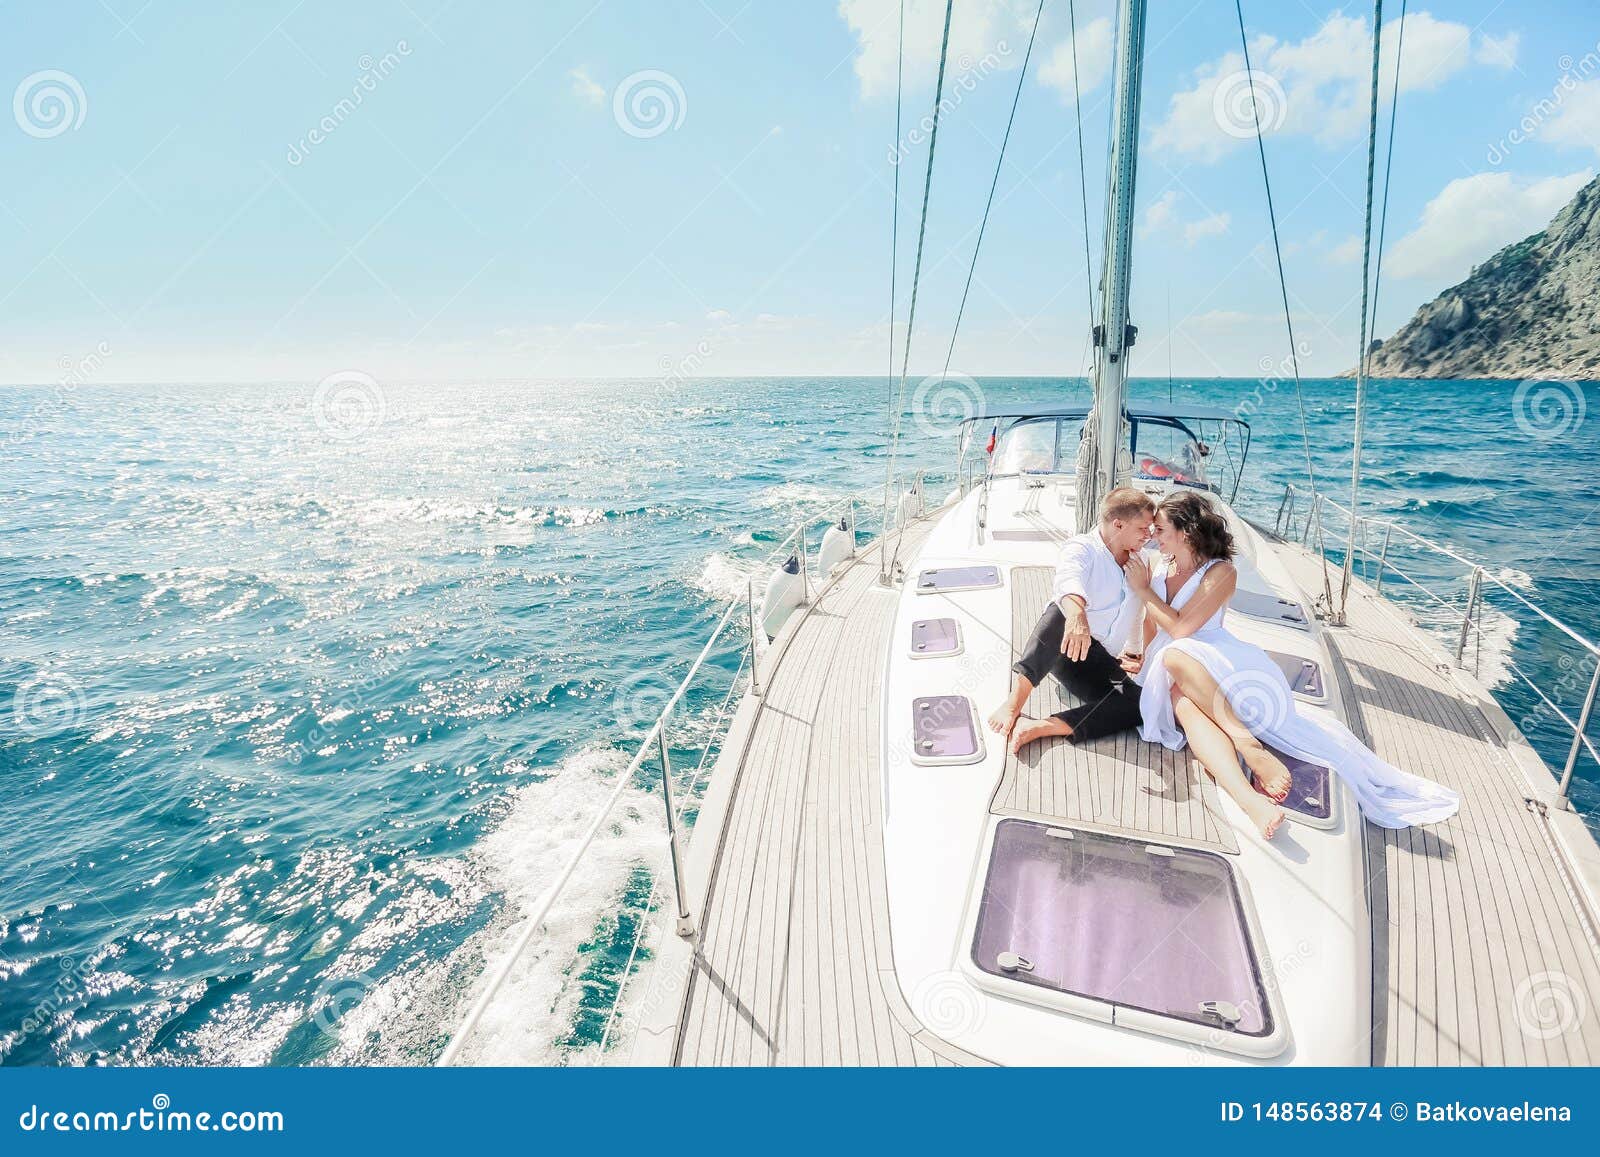 young couple relaxing on a yacht. happy wealthy man and a woman by private boat have sea trip.